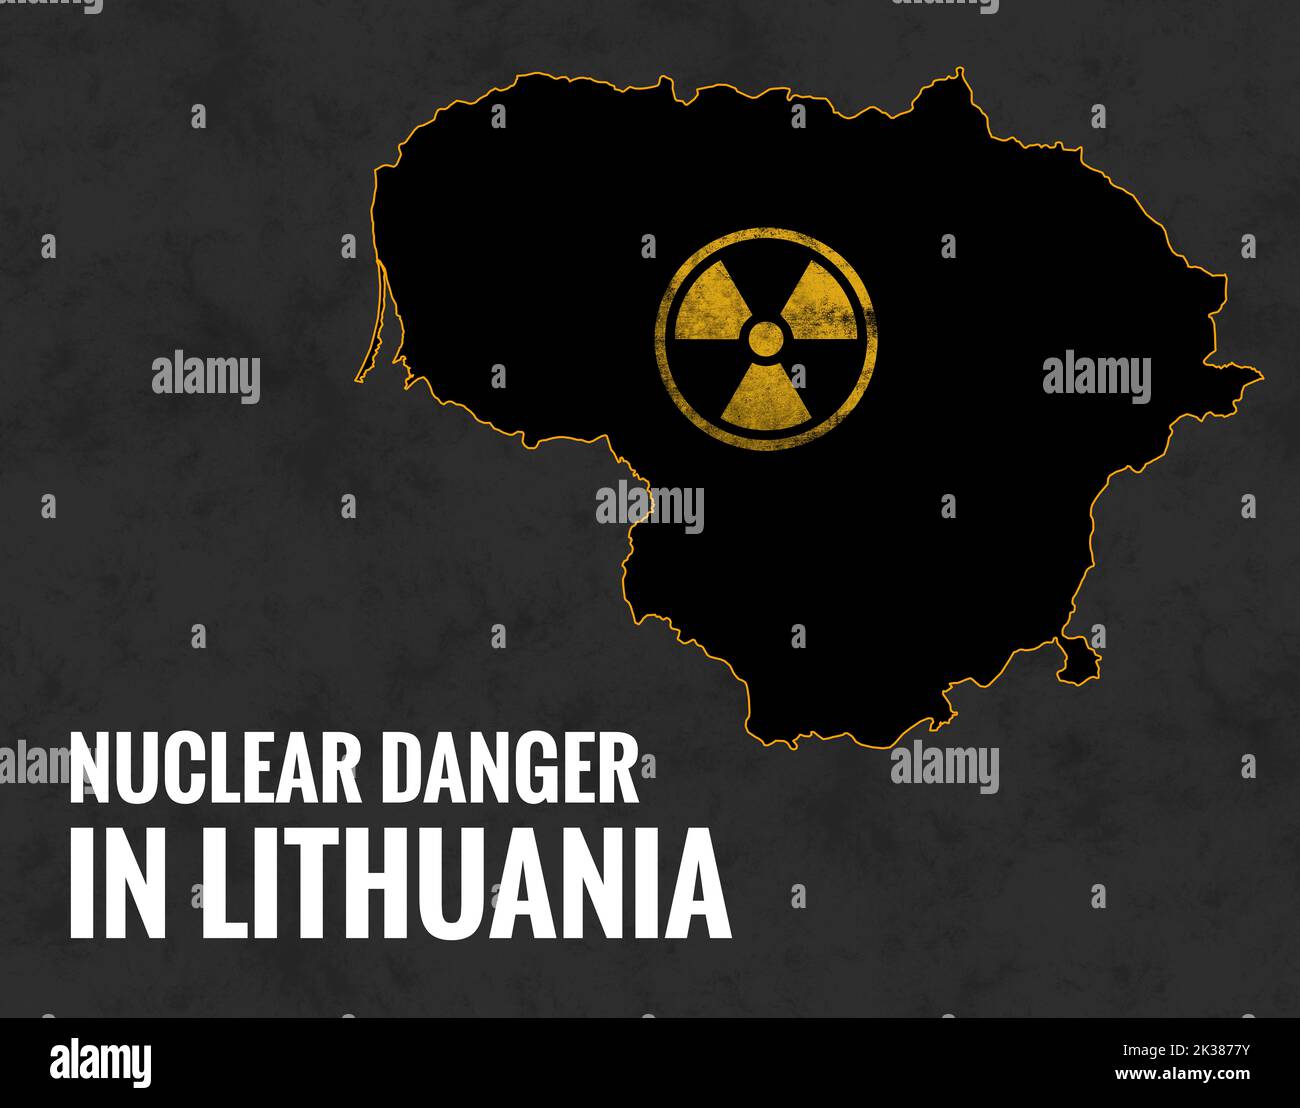 Real risk of a nuclear disaster in the Lithuania, Nuclear danger, Nuclear strike on Lithuania, Nuclear warfare Stock Photo